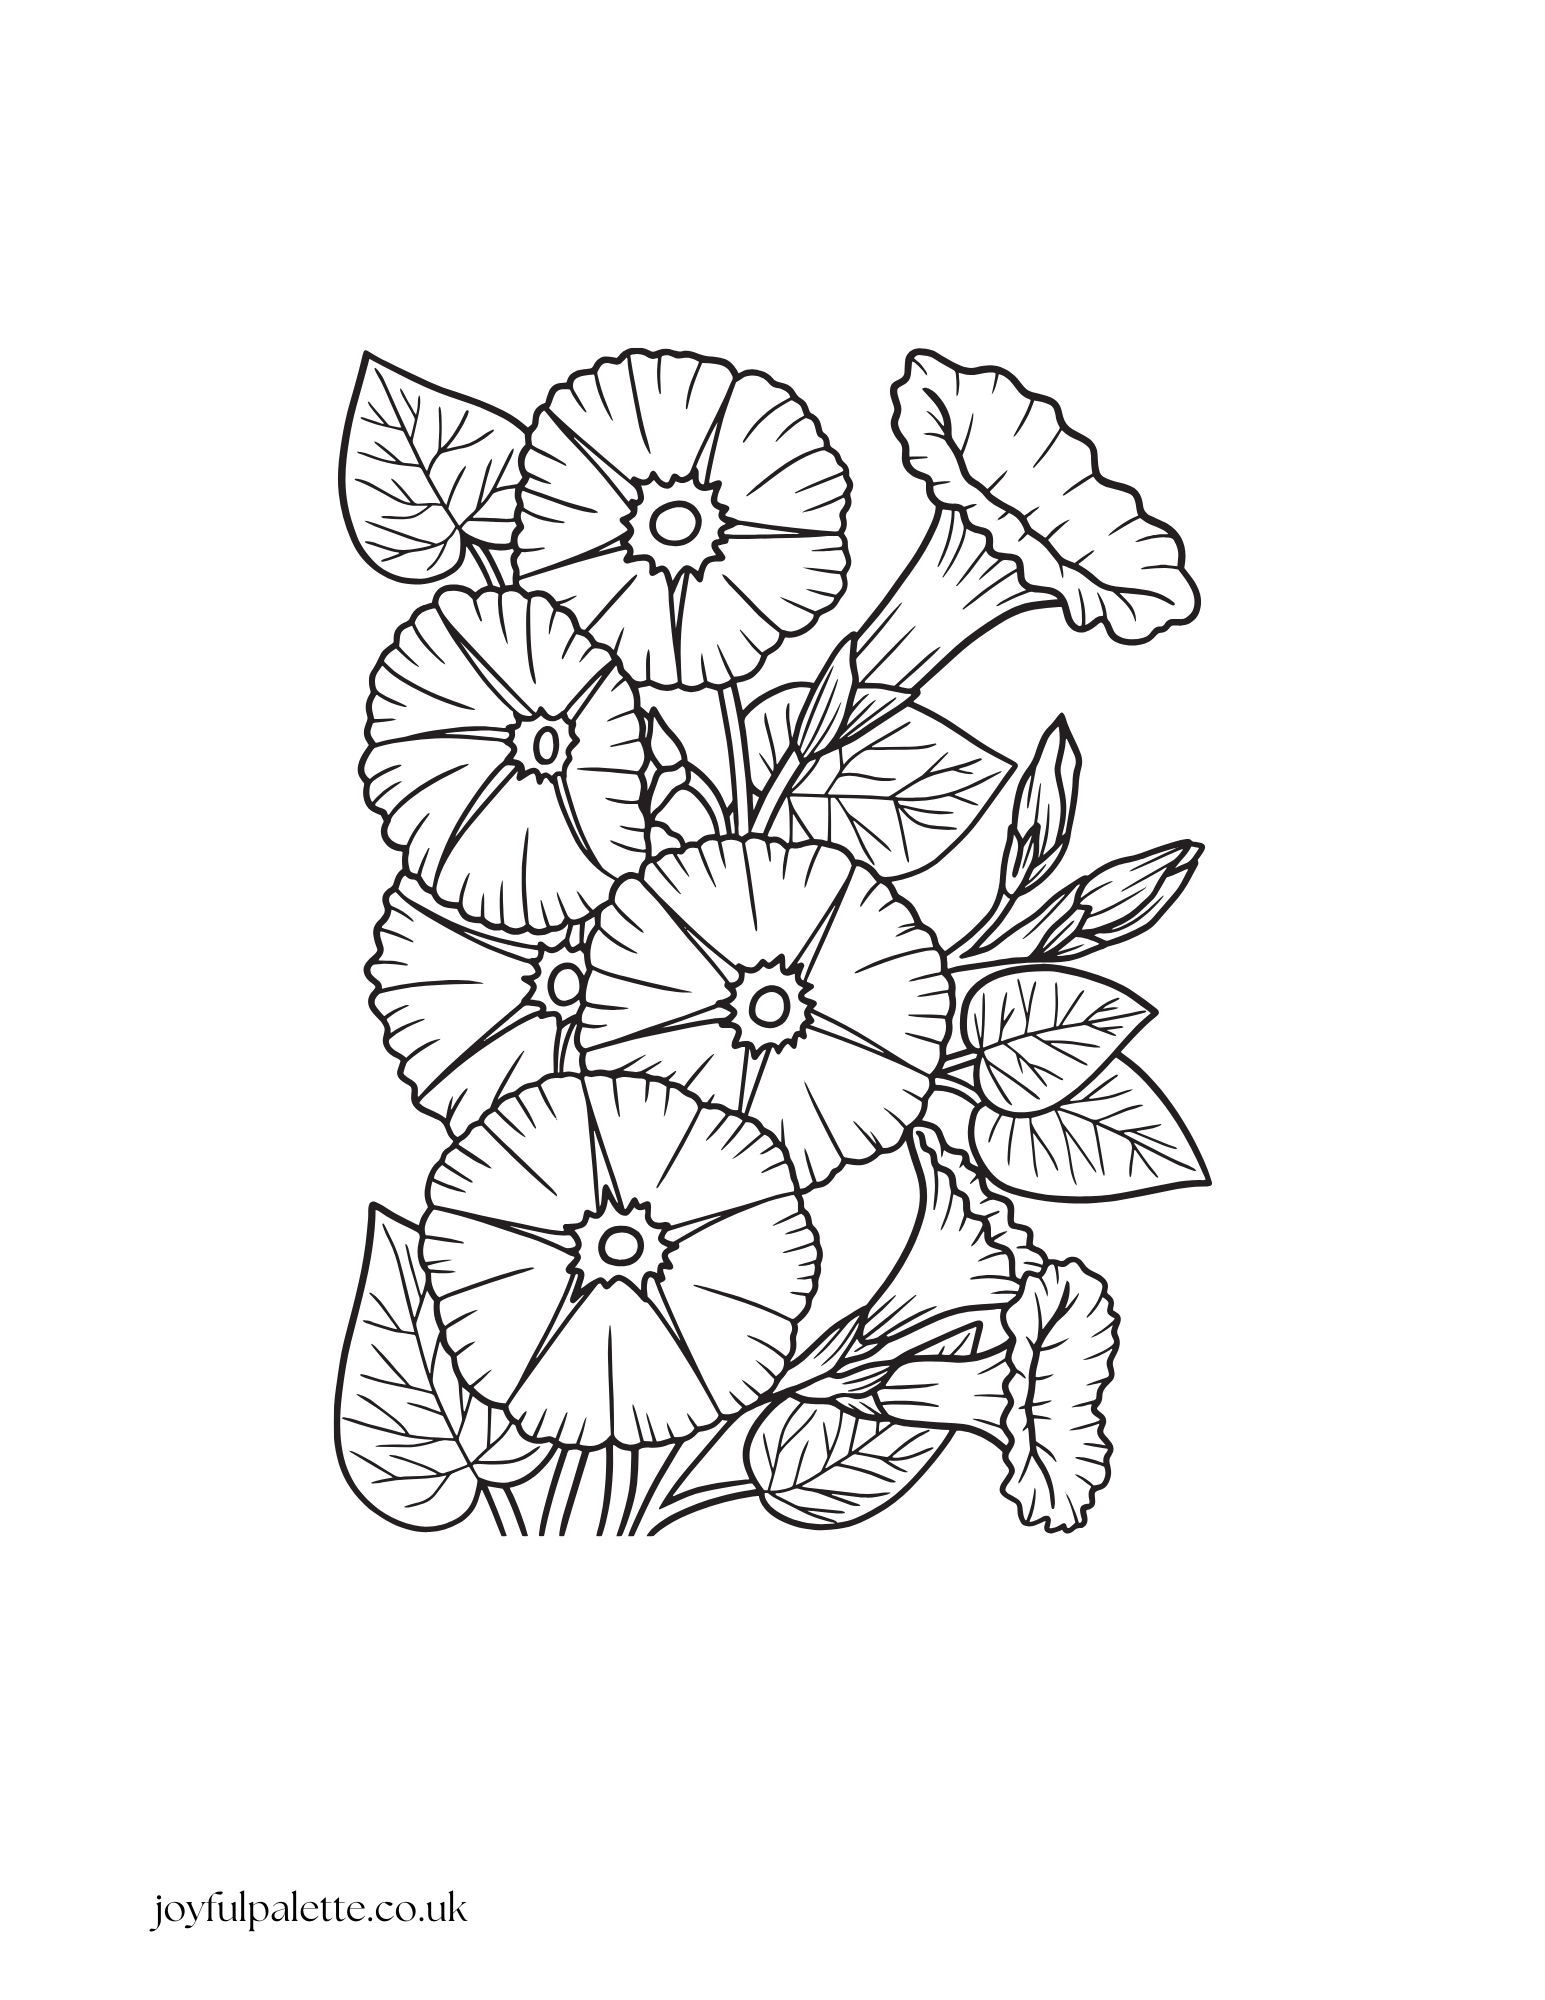  Flower Coloring Page PDF